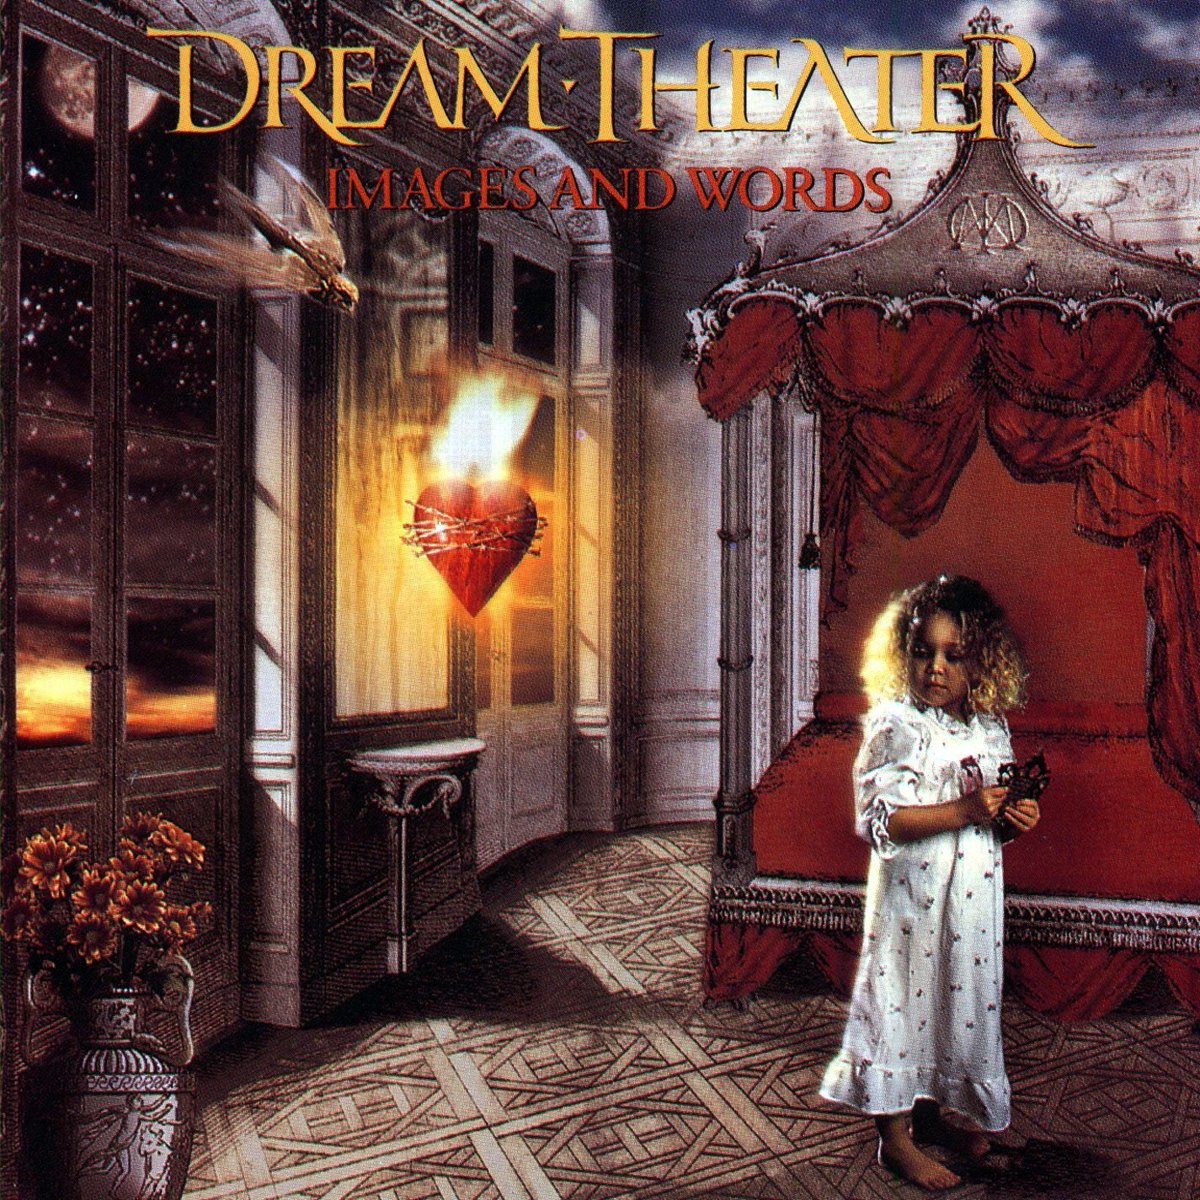 Realized on the @SteveDeaceShow Buy/Sell/Hold podcast this week you all need an education in progressive metal. Start here: 

'Images and Words' - @dreamtheaternet 

#AlbumPickOfTheWeek